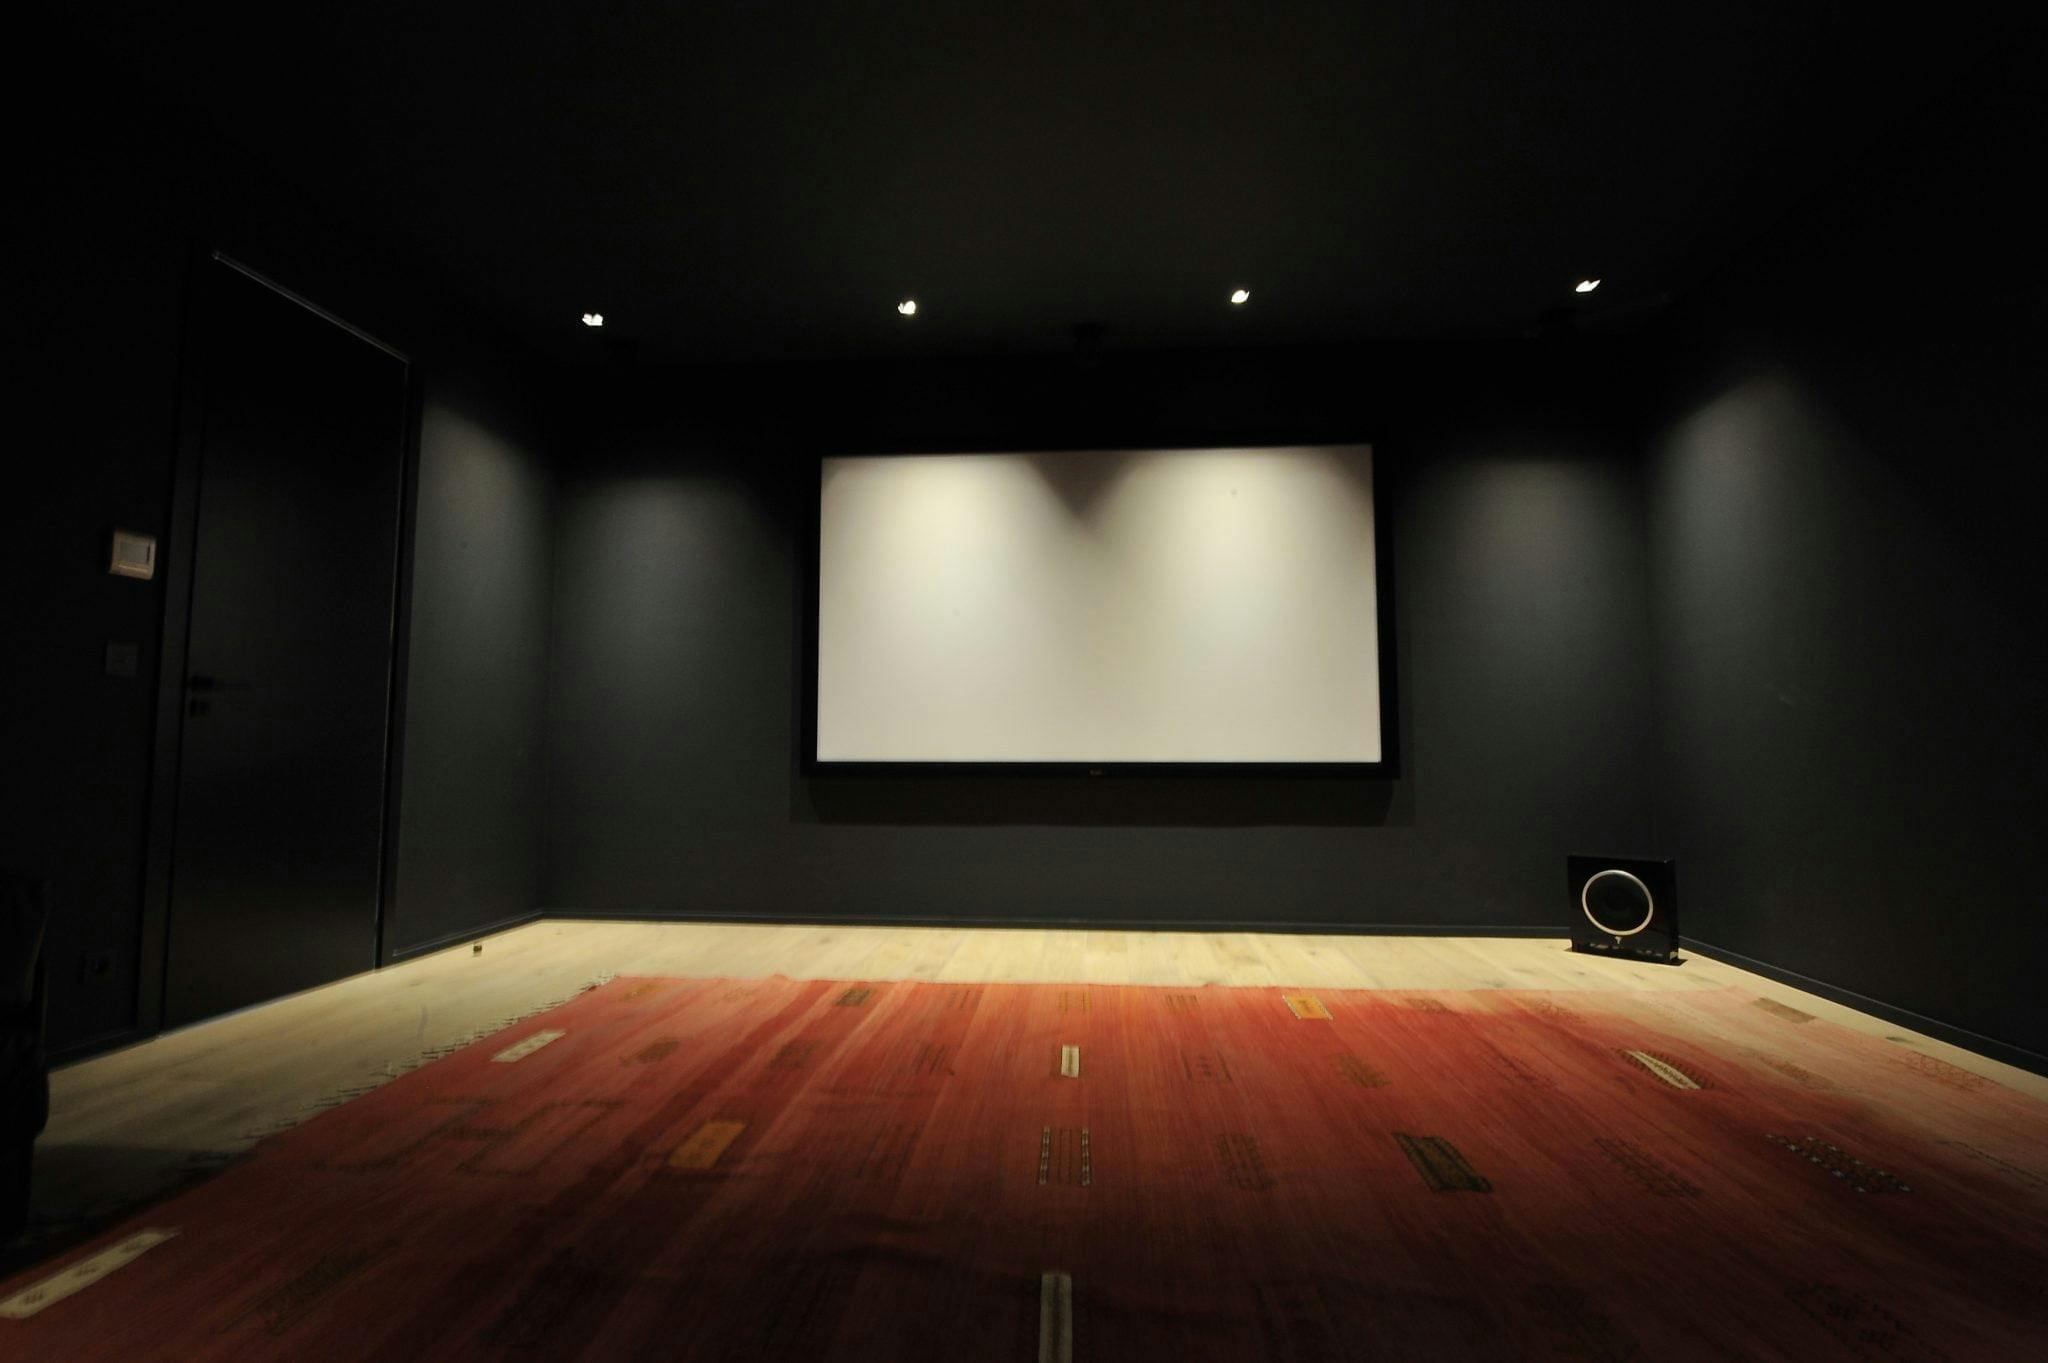 private projection room known as home cinema